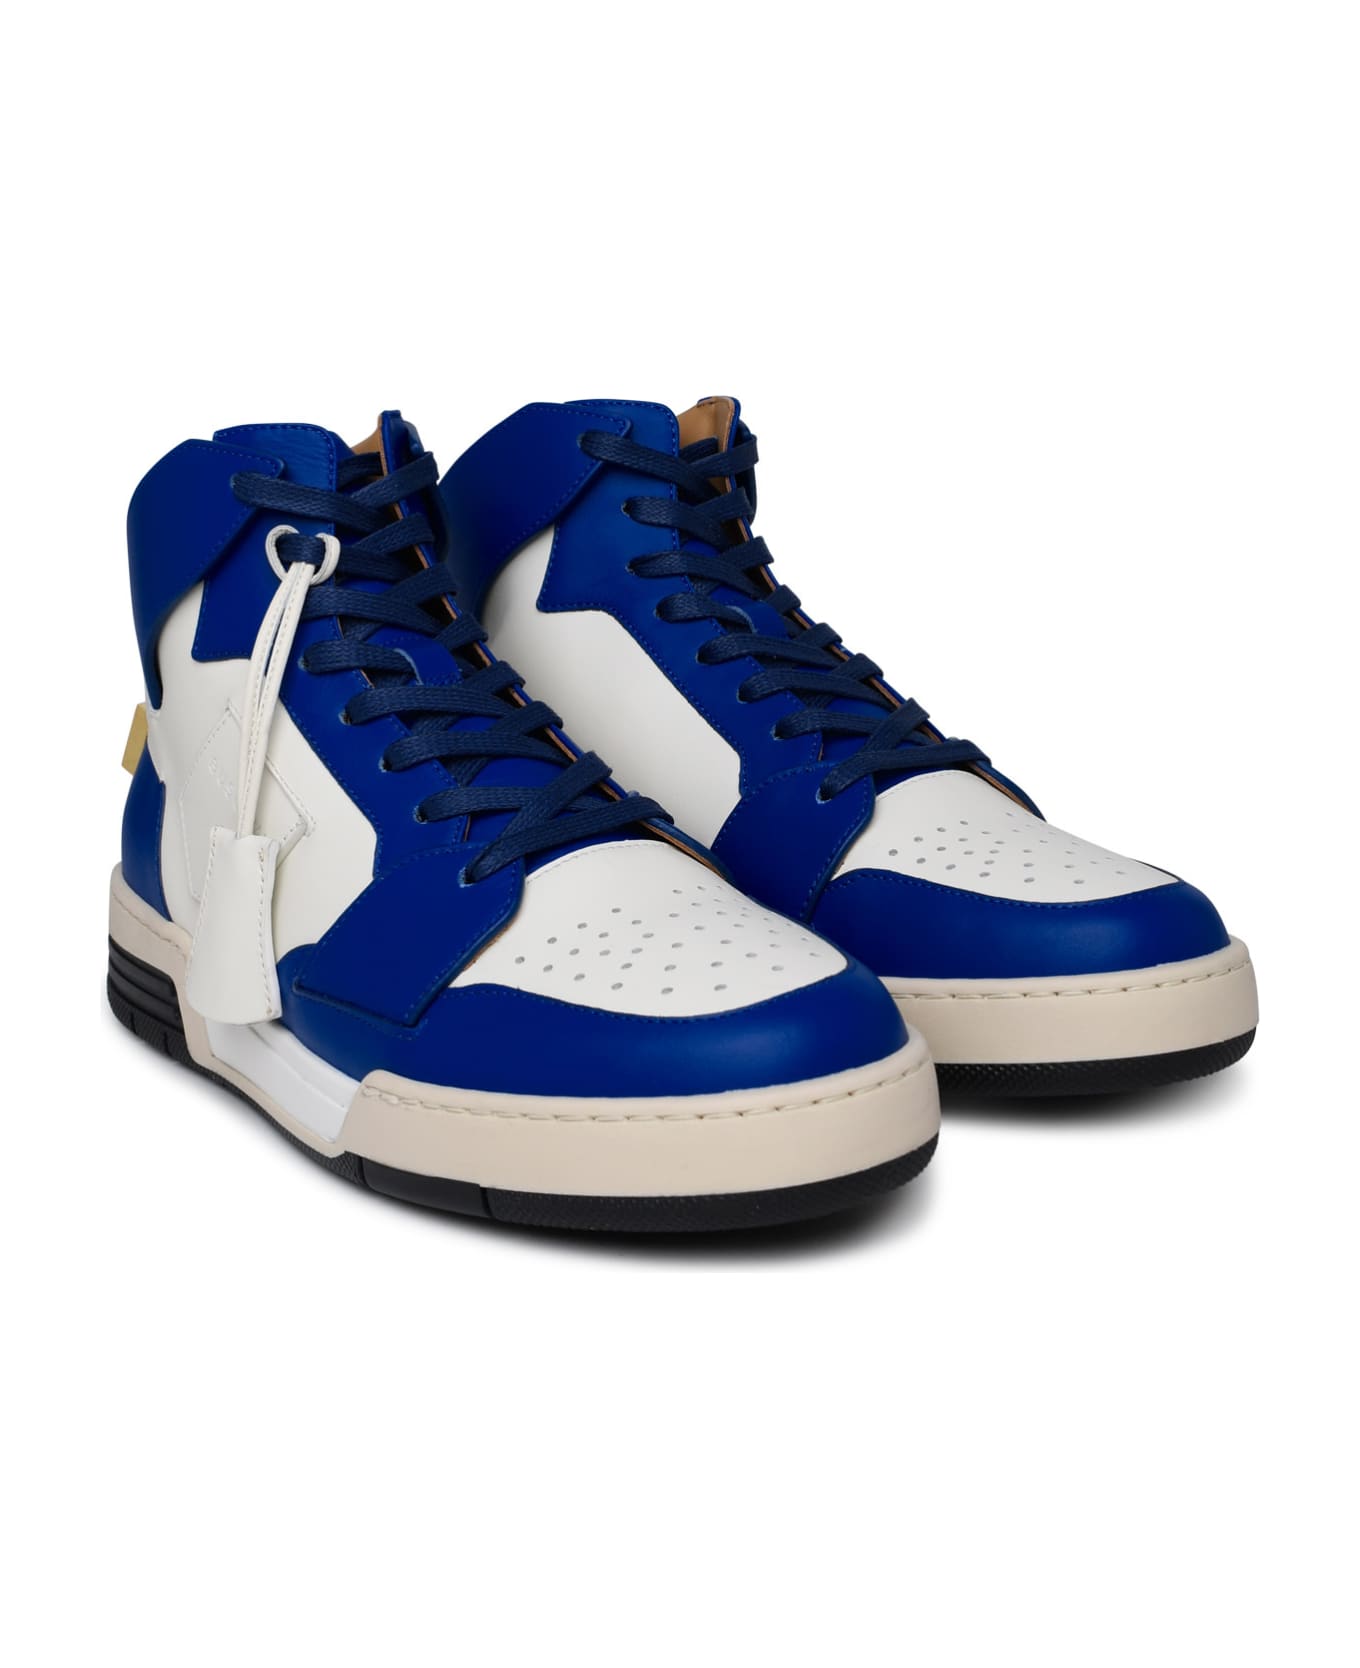 Buscemi 'air Jon' White And Blue Leather Sneakers - White スニーカー